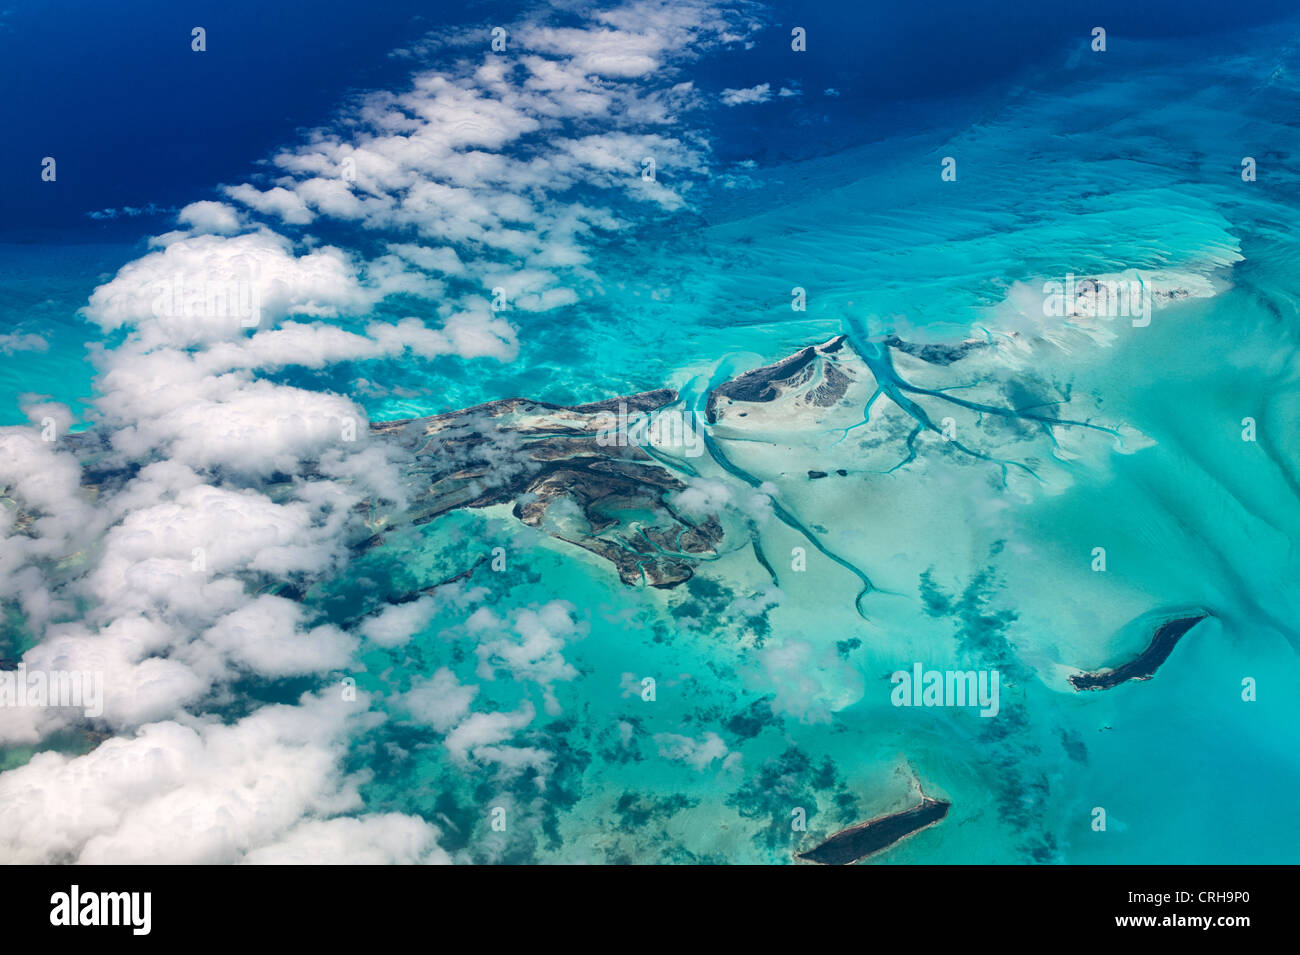 Aerial view of islands and clouds in the Bahamas. Stock Photo